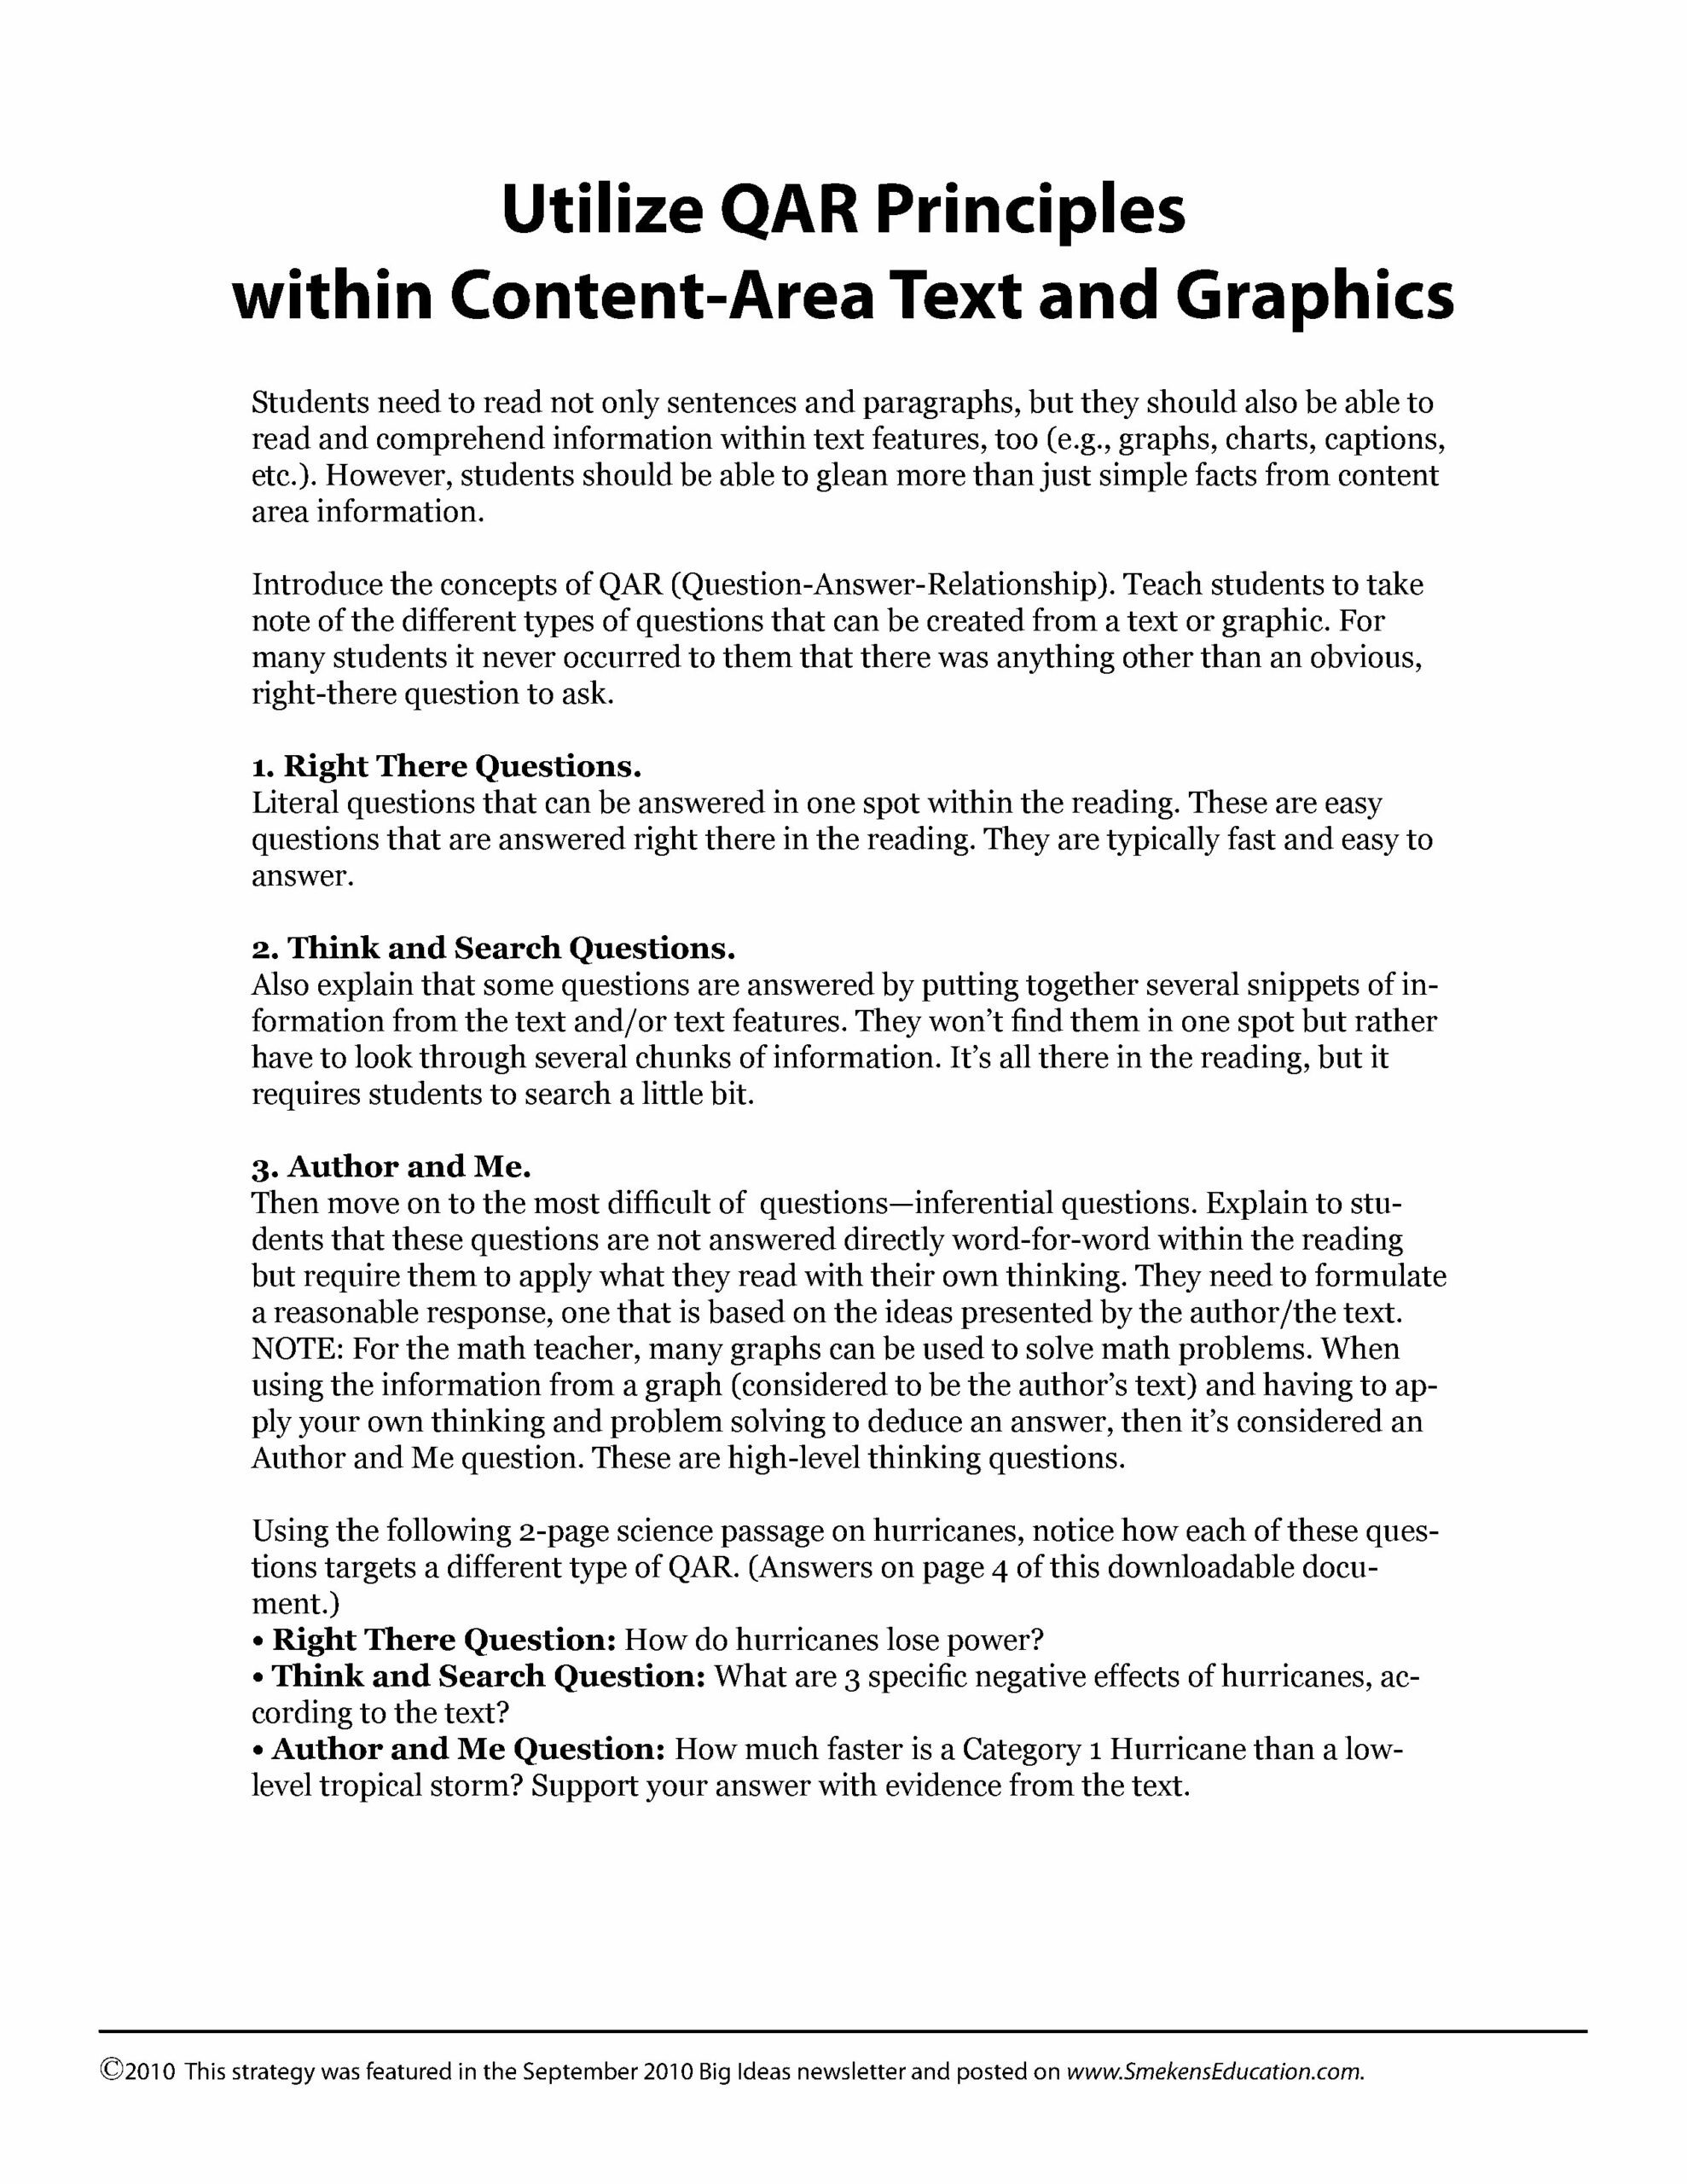 Utilize QAR Principles within content-area text and graphics - PDF Download